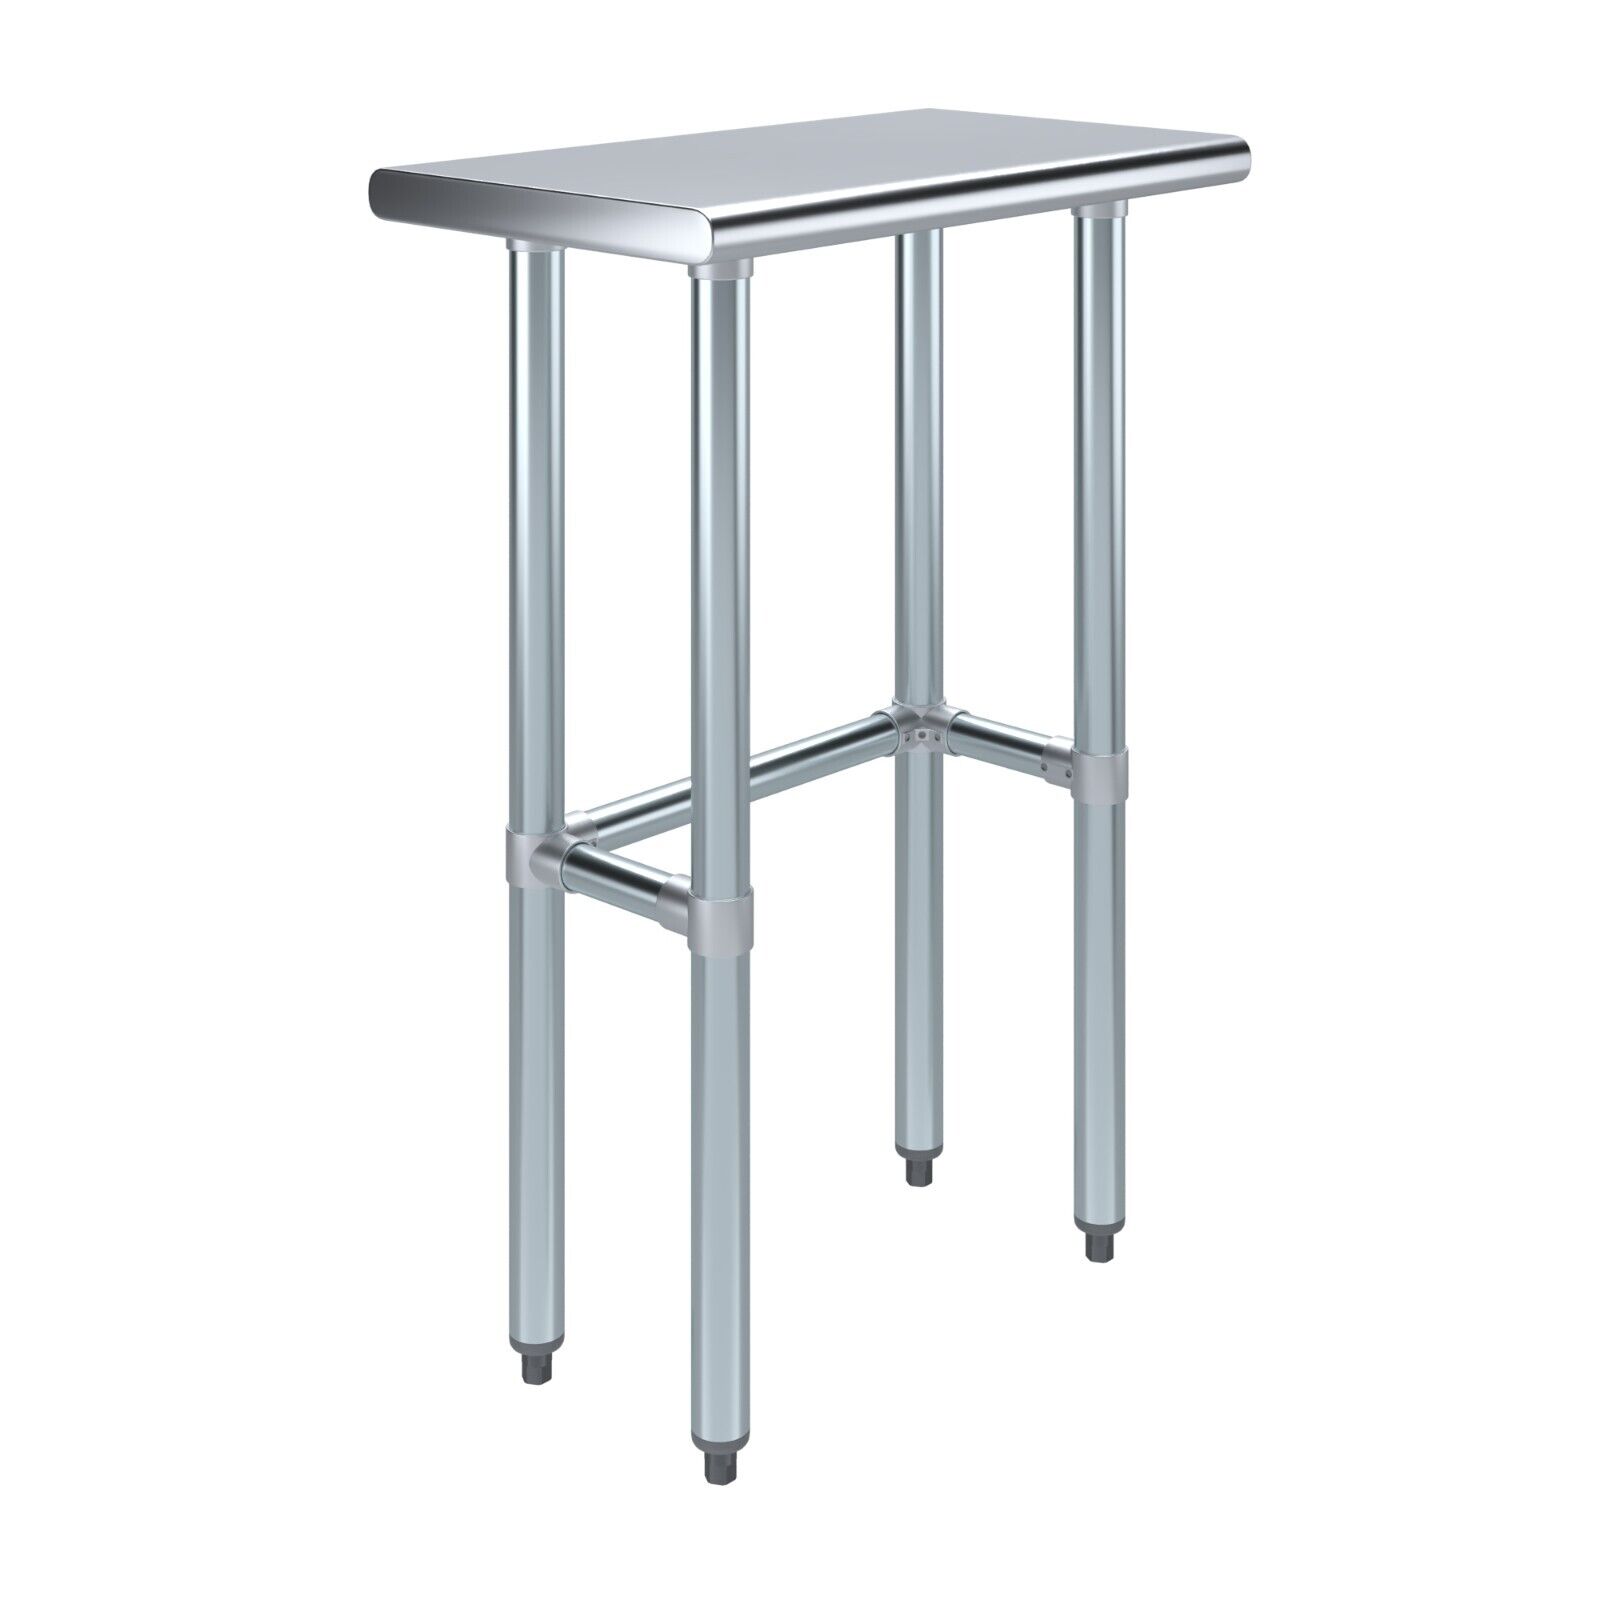 14 in. x 24 in. Open Base Stainless Steel Work Table | Residential & Commercial